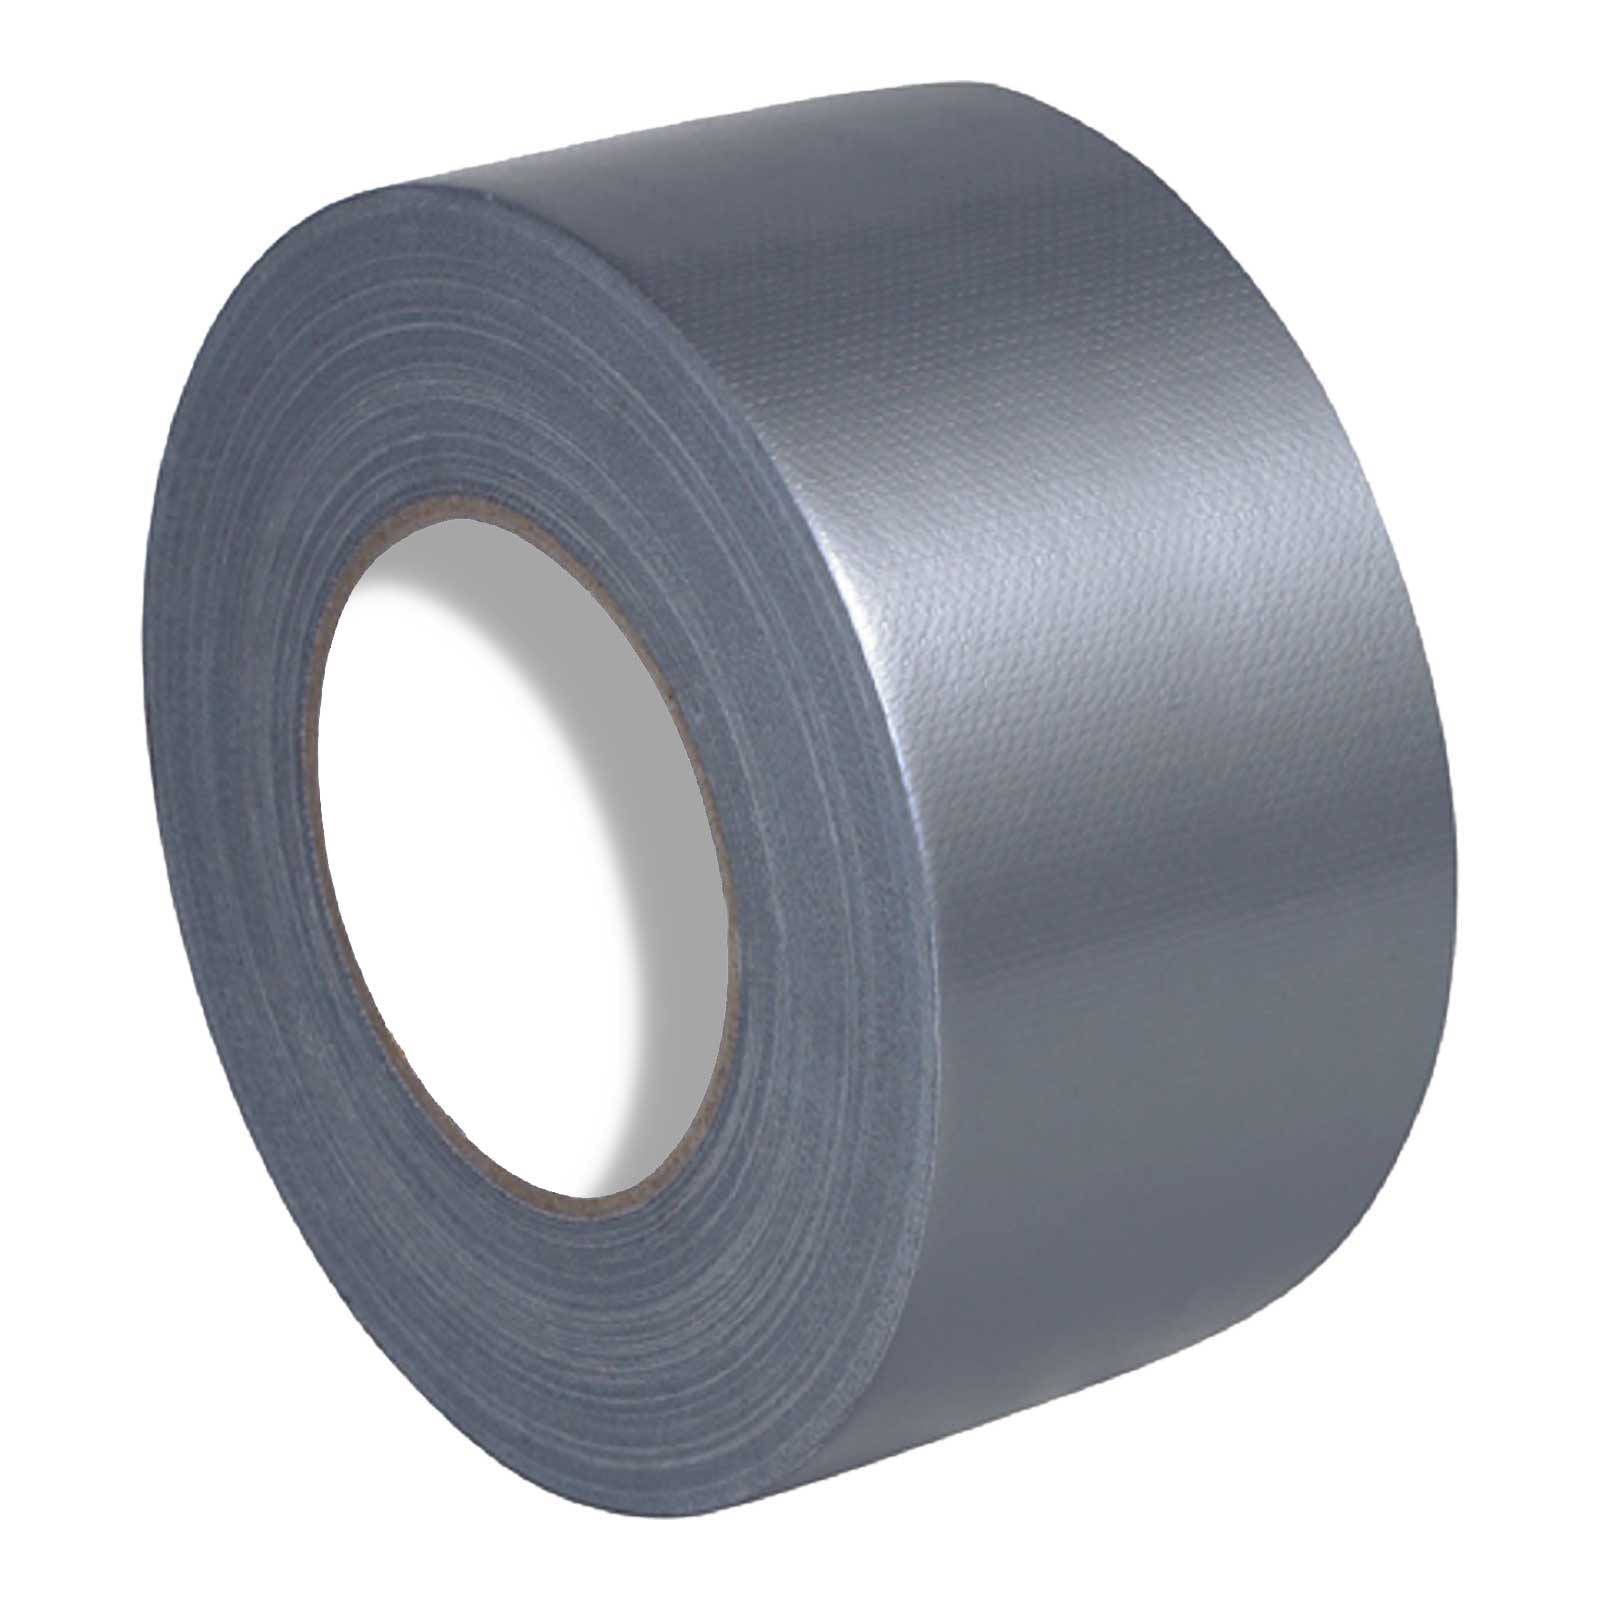 New WHITES Tape Duct SILVER 48mm (30m Roll) #TAPEDUCTS